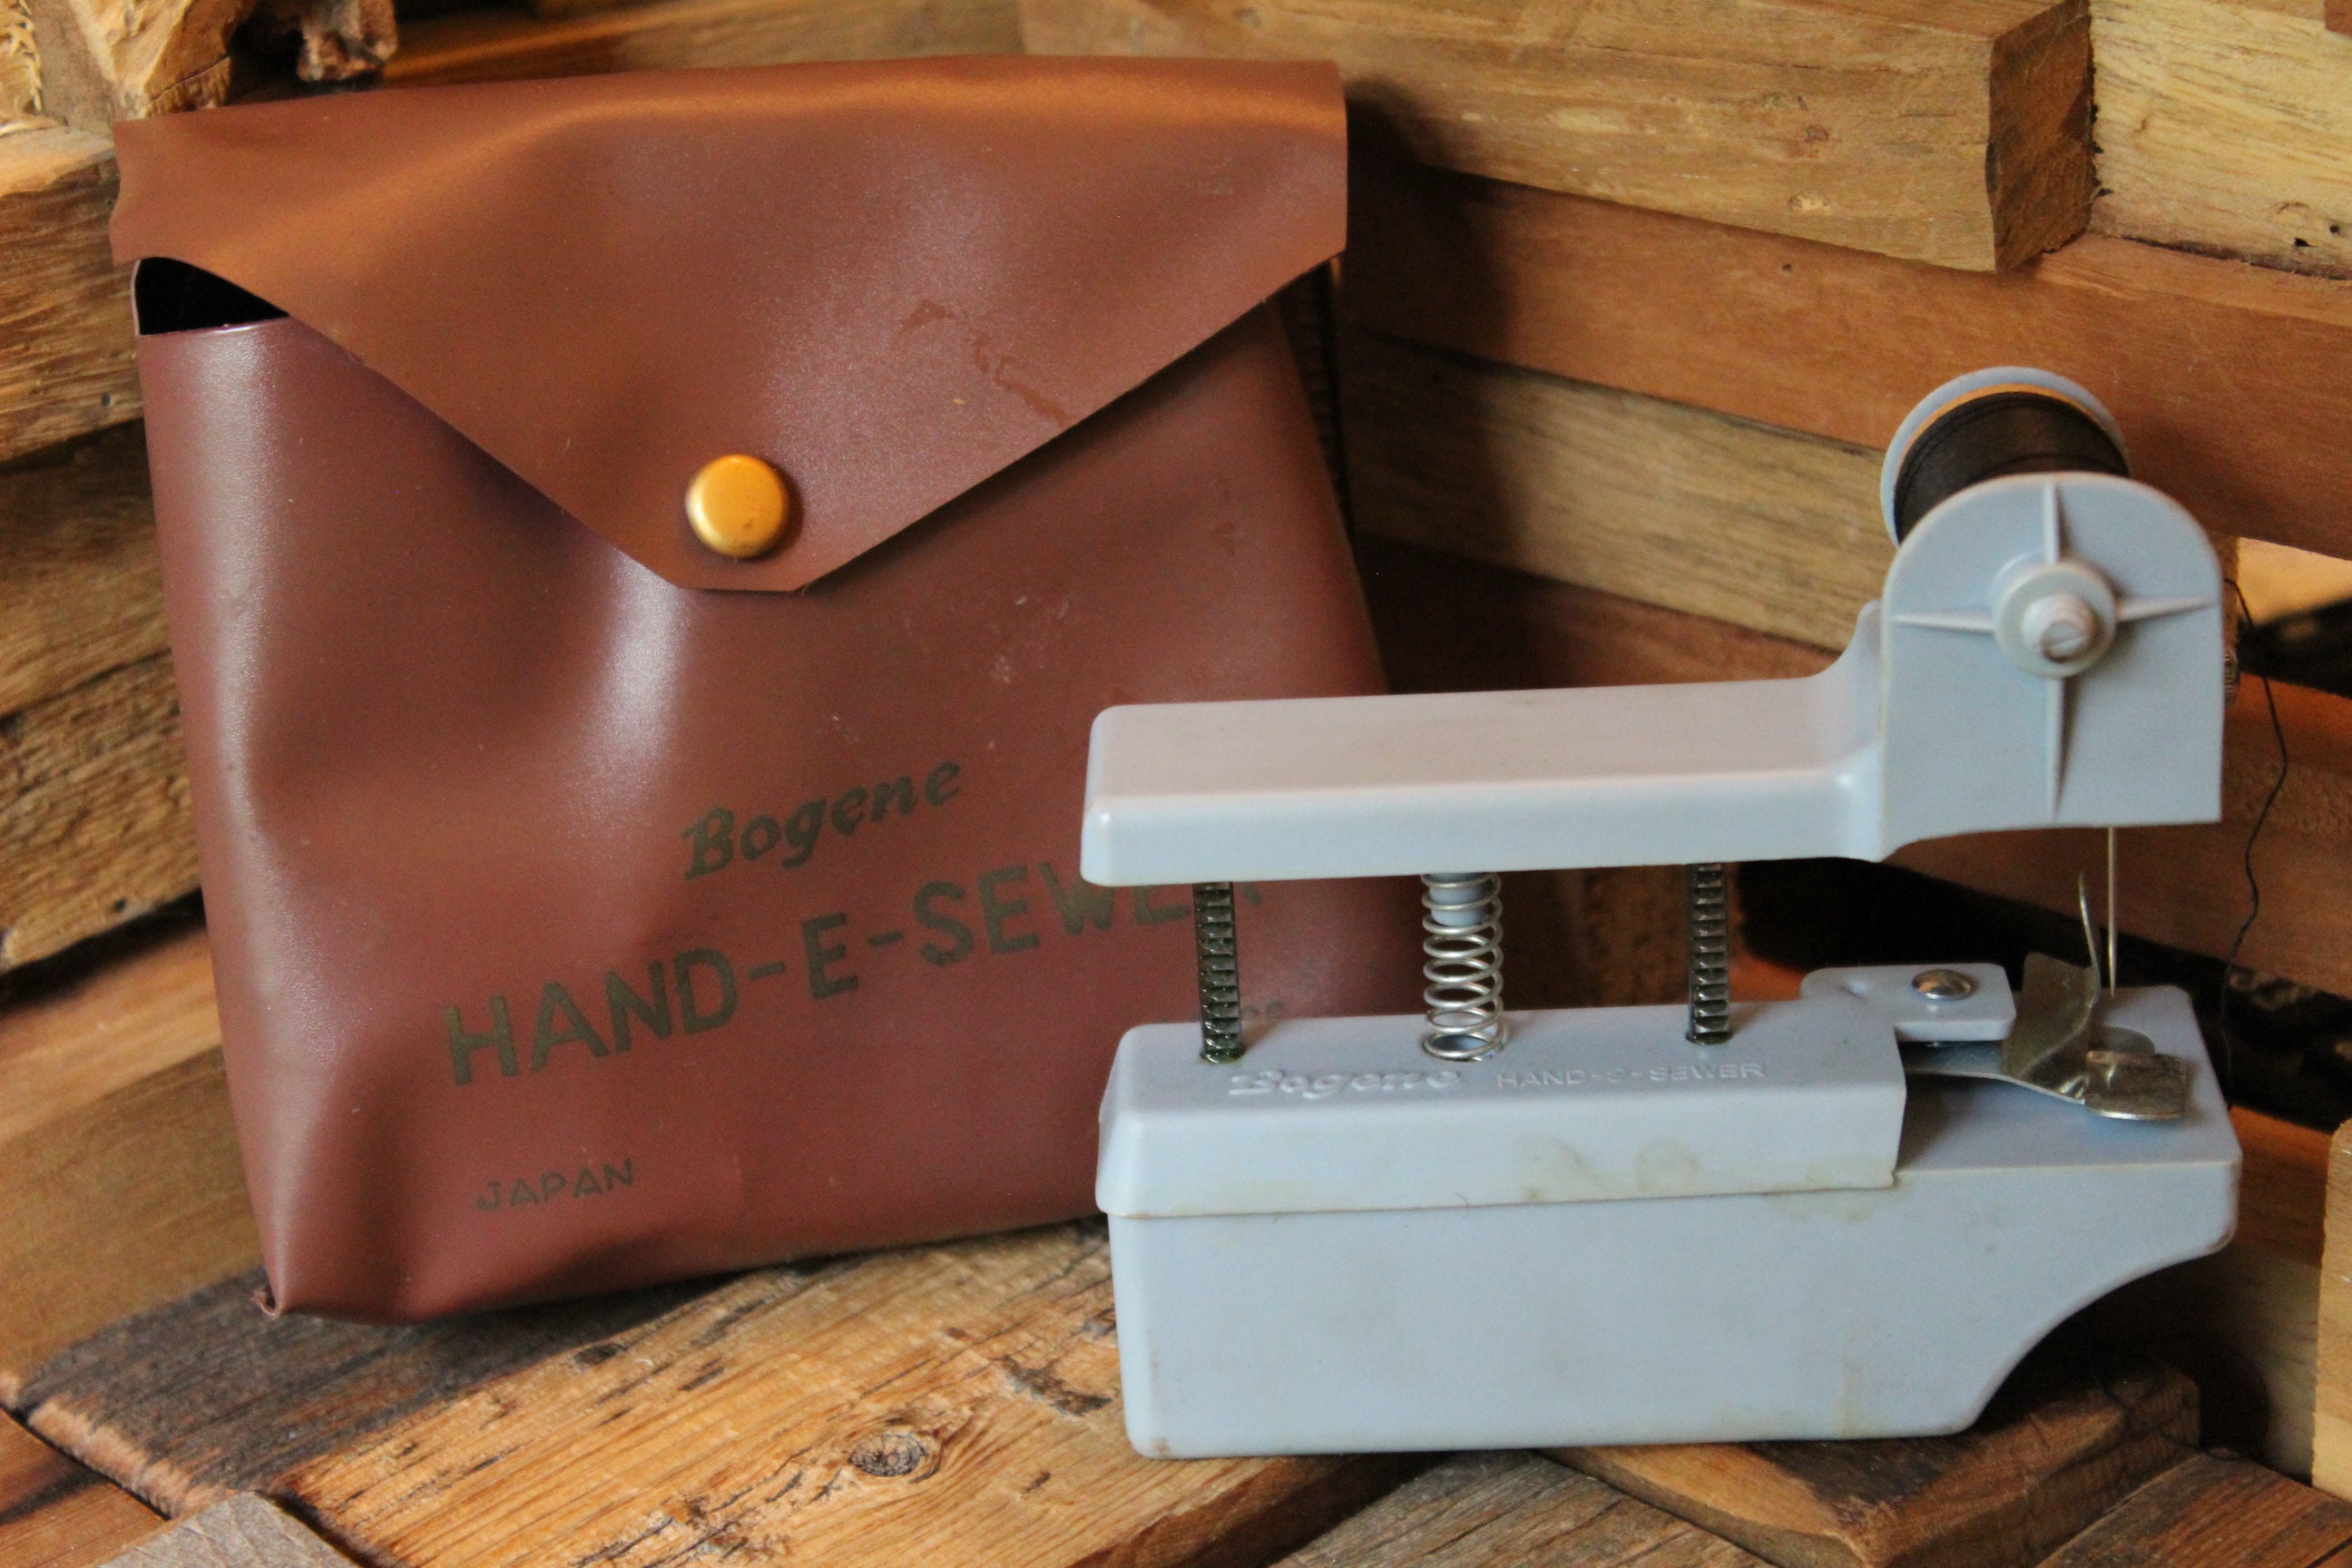 1960s Bogene Hand-e-sewer With Original Case Made in Japan